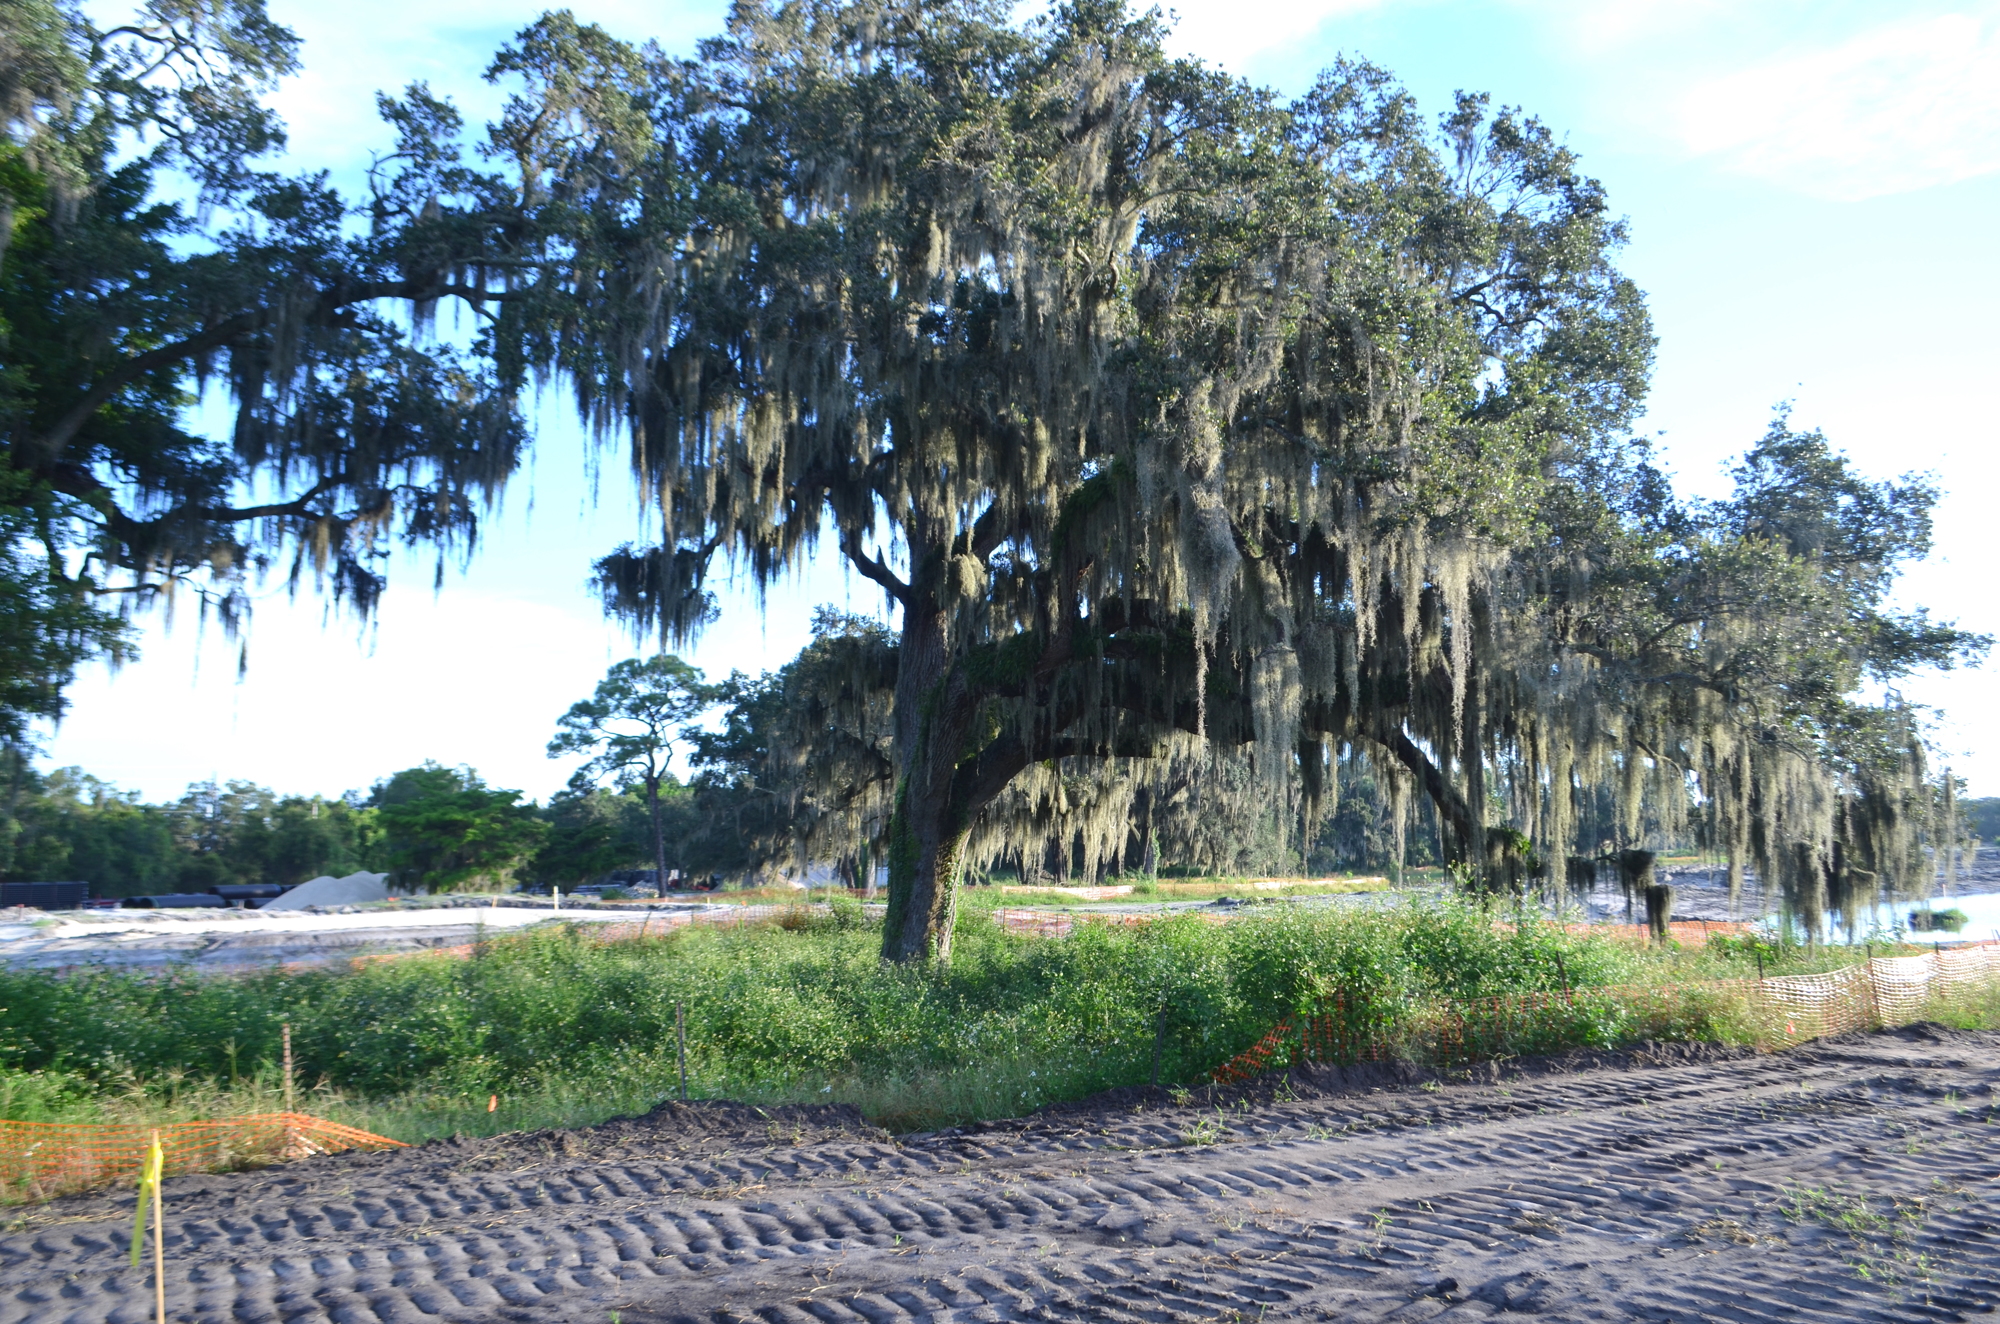 Hundreds of trees planted since the Bobby Jones Golf Complex first opened have been removed, but hundreds of original live oaks and others remain. (Andrew Warfield)